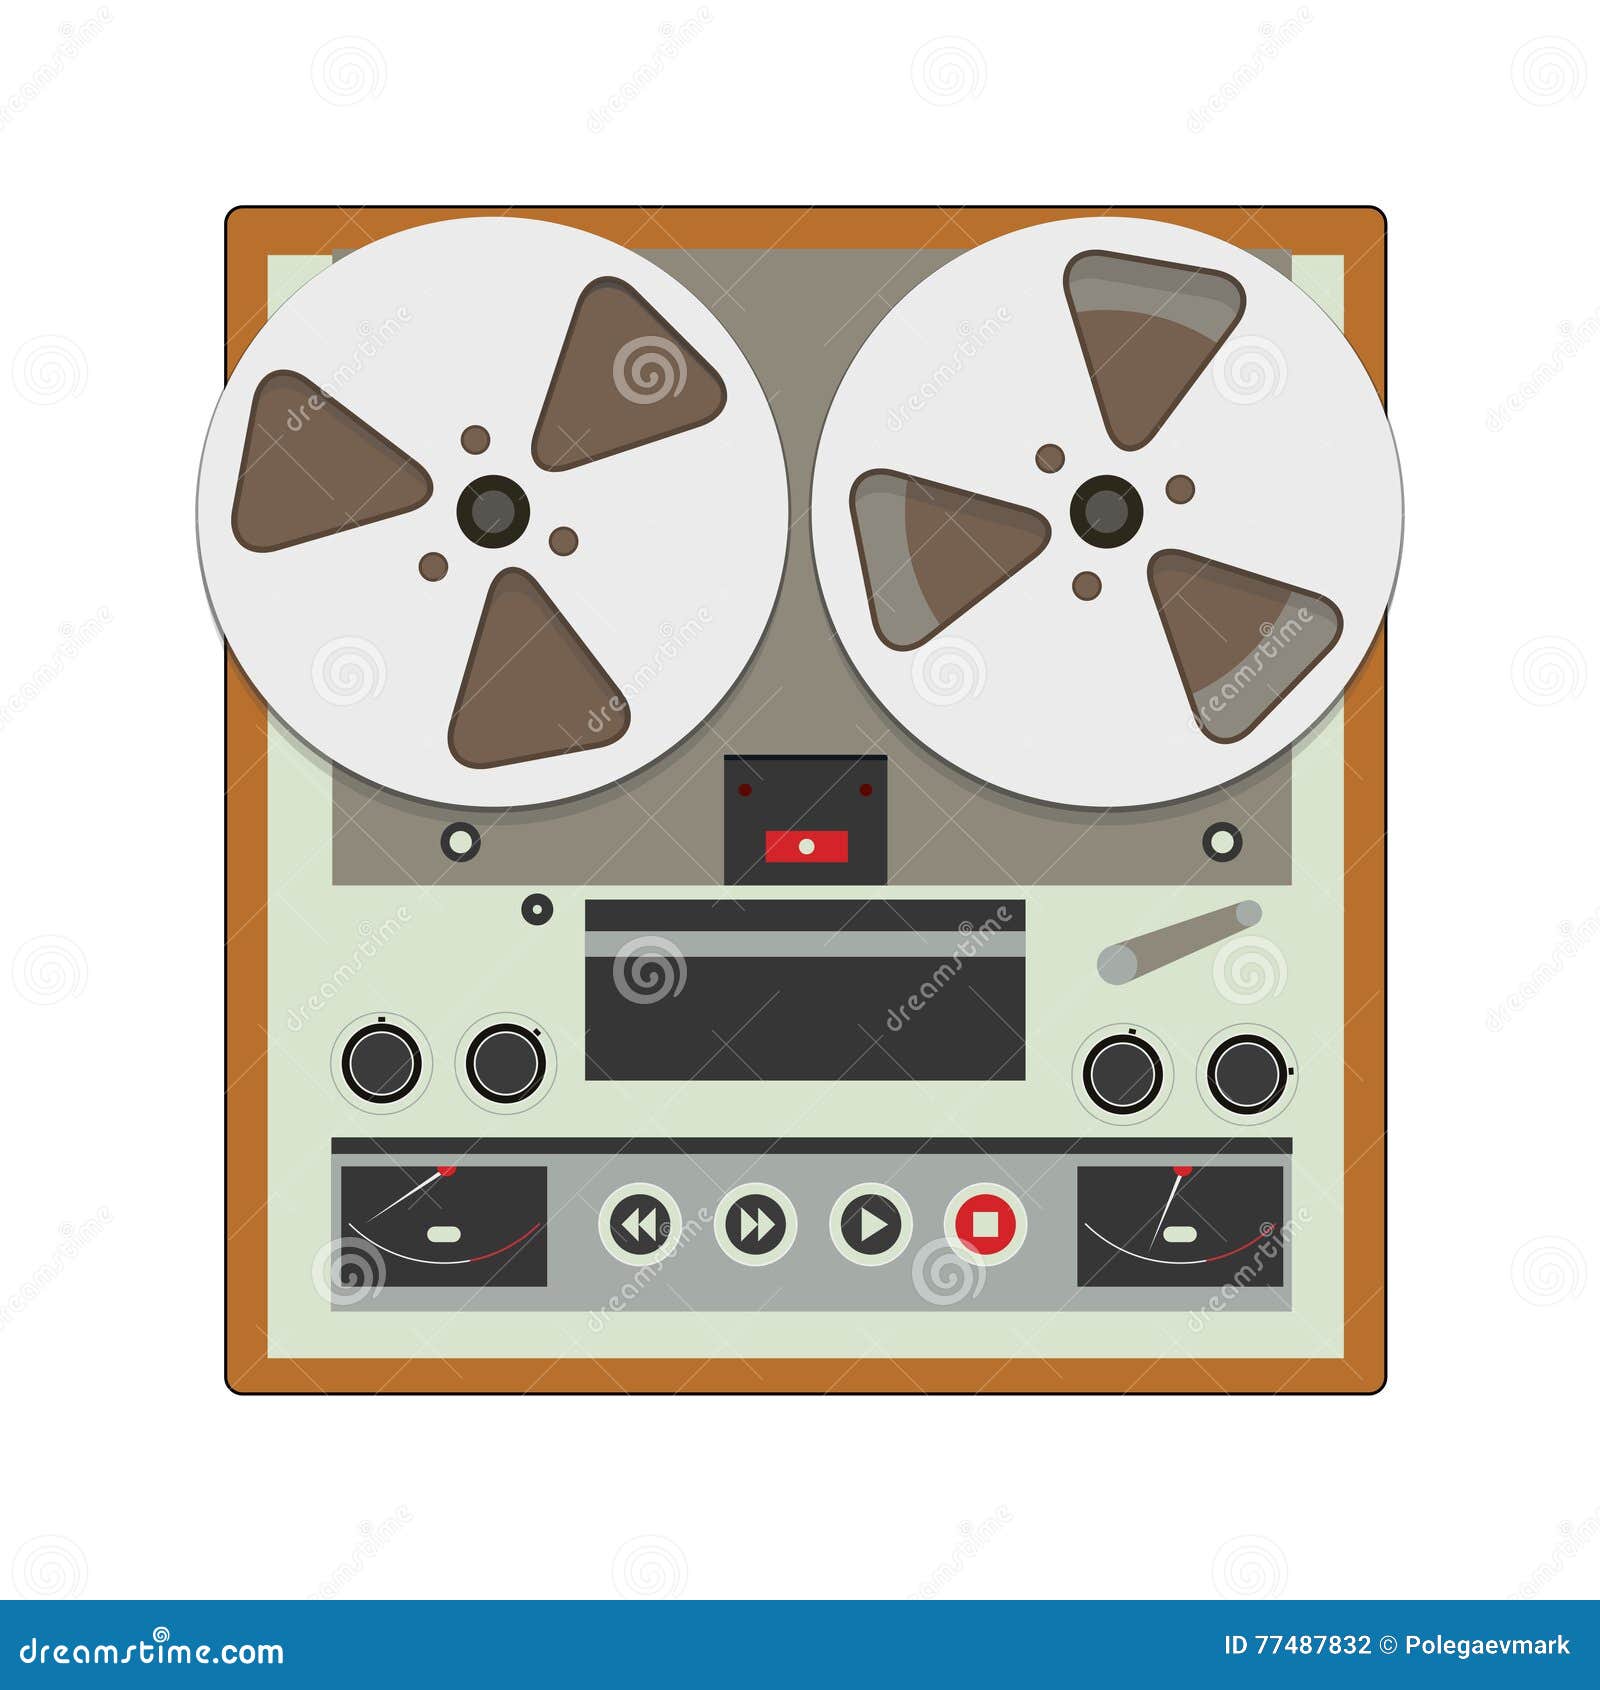 https://thumbs.dreamstime.com/z/reel-to-reel-recorder-cassette-tape-cartridges-retro-music-gadget-st-century-old-spool-musical-device-icon-vector-77487832.jpg